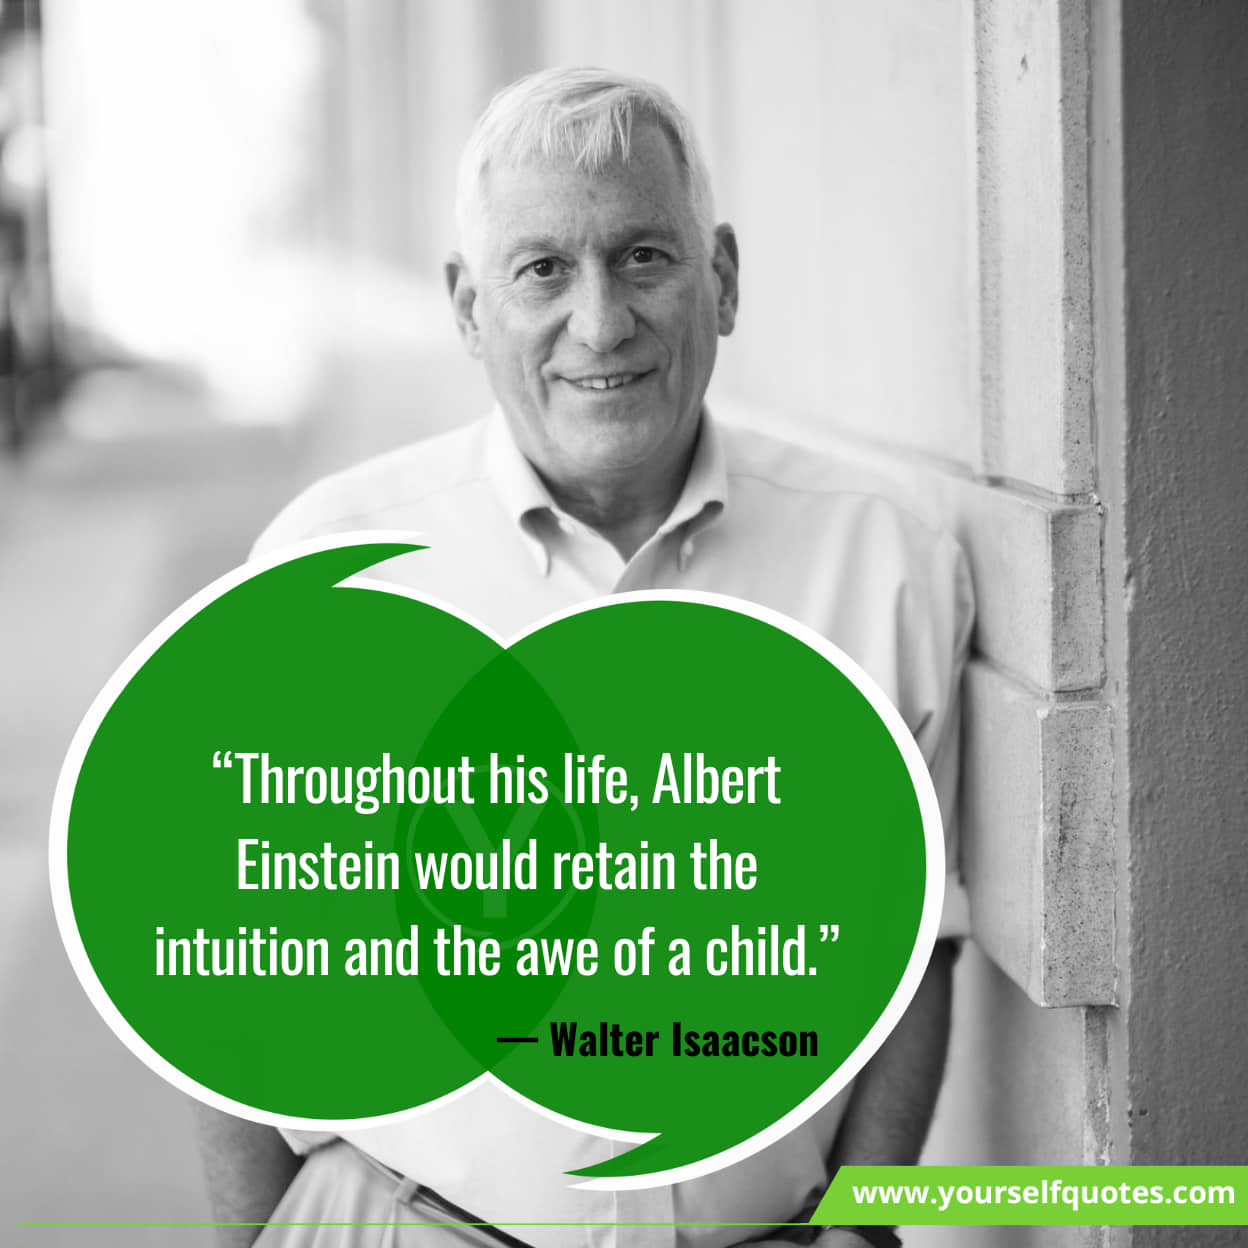 Inspiring Walter Isaacson Quotes For Happiness